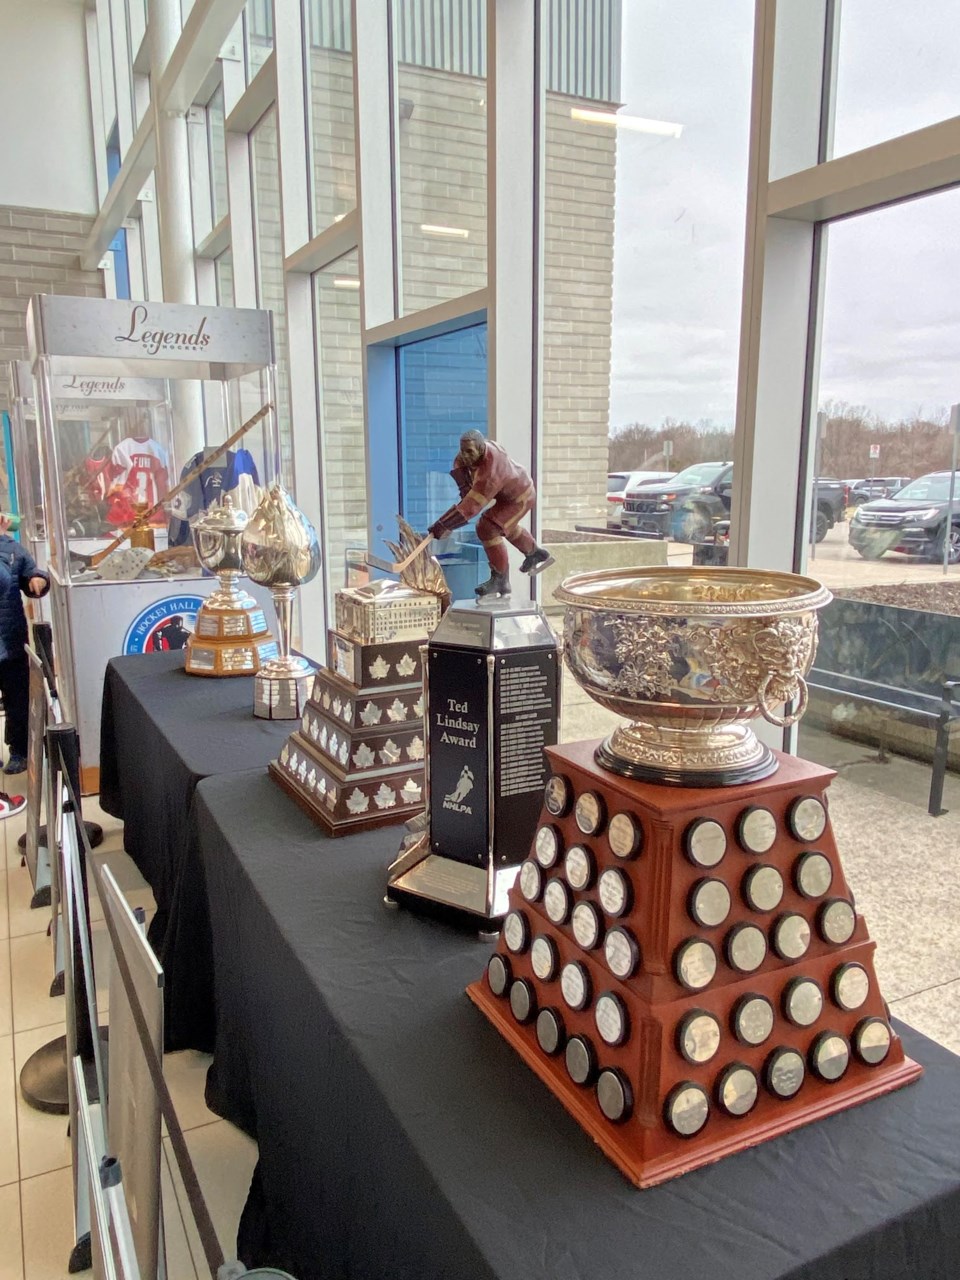 Famous Hockey Trophies on Display